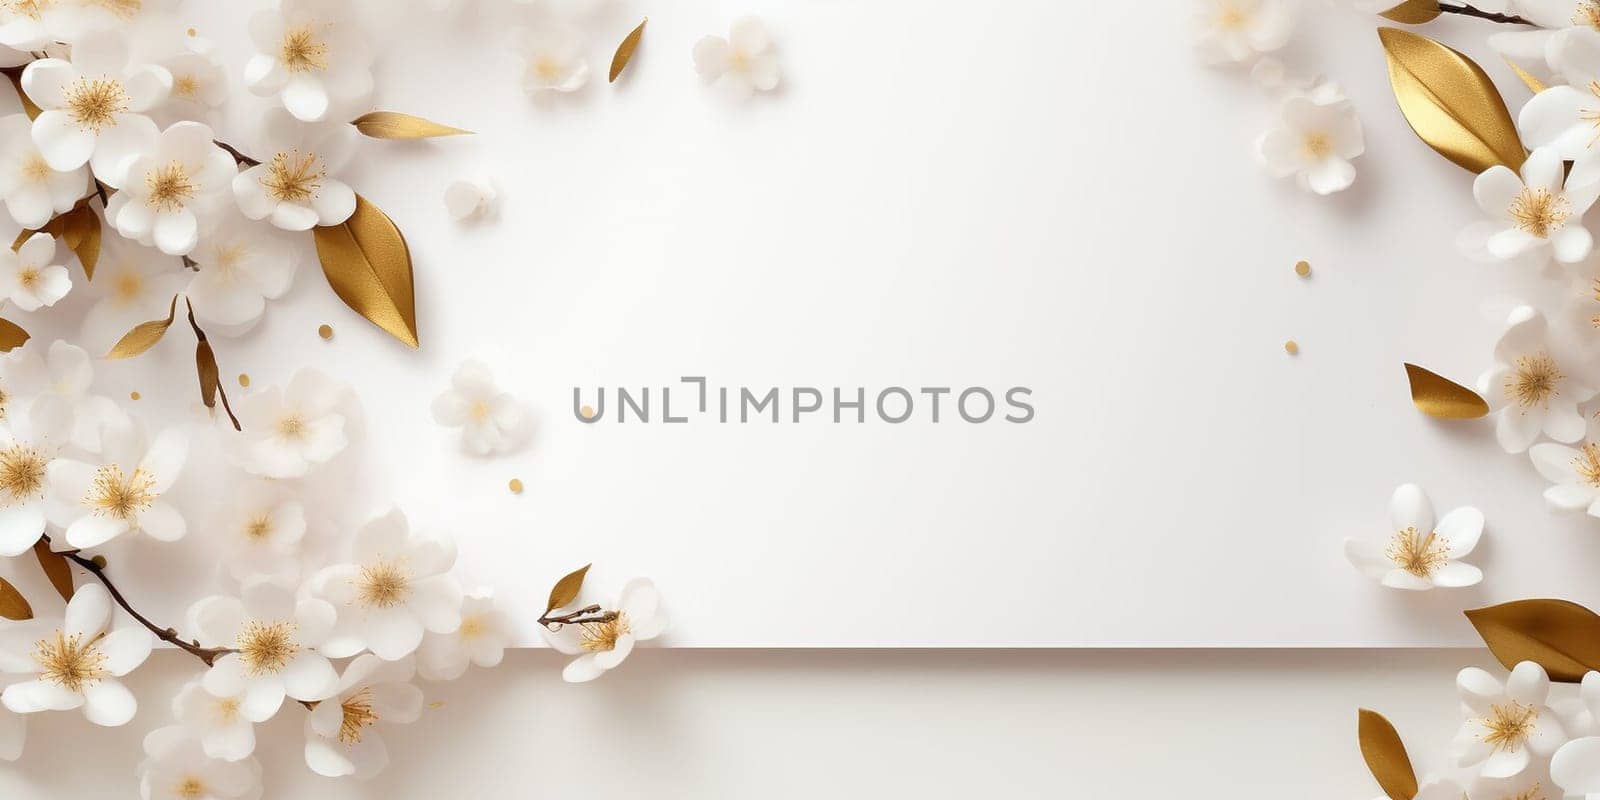 Spring decorations background with beautiful white wild flowers. Copy space for text banner